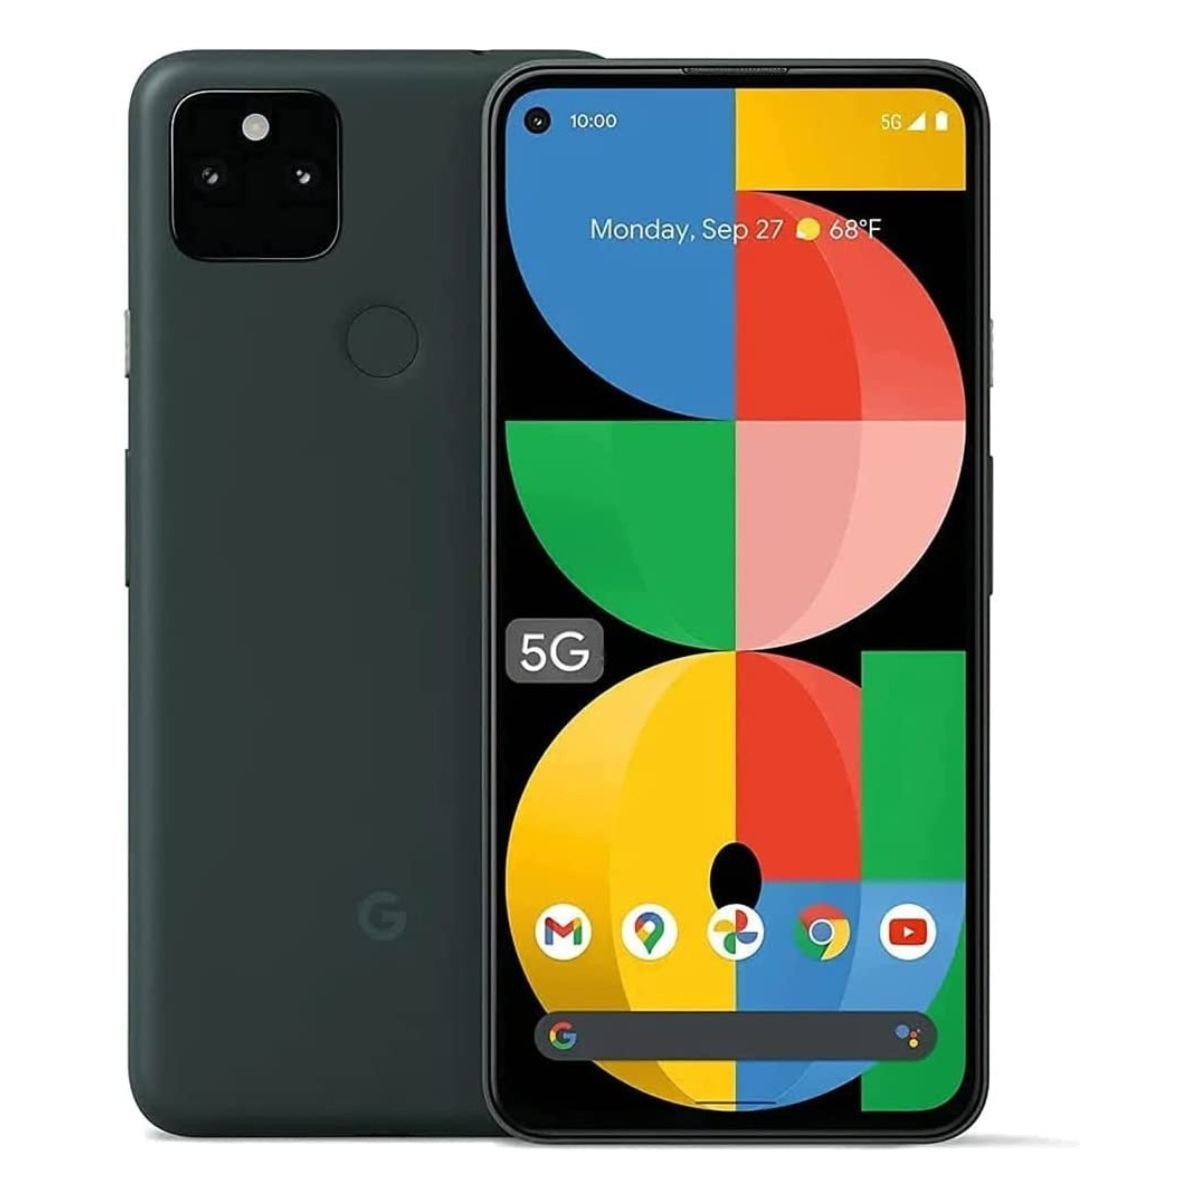 Google Pixel 6a vs. Pixel 5a: Which phone is the better value?